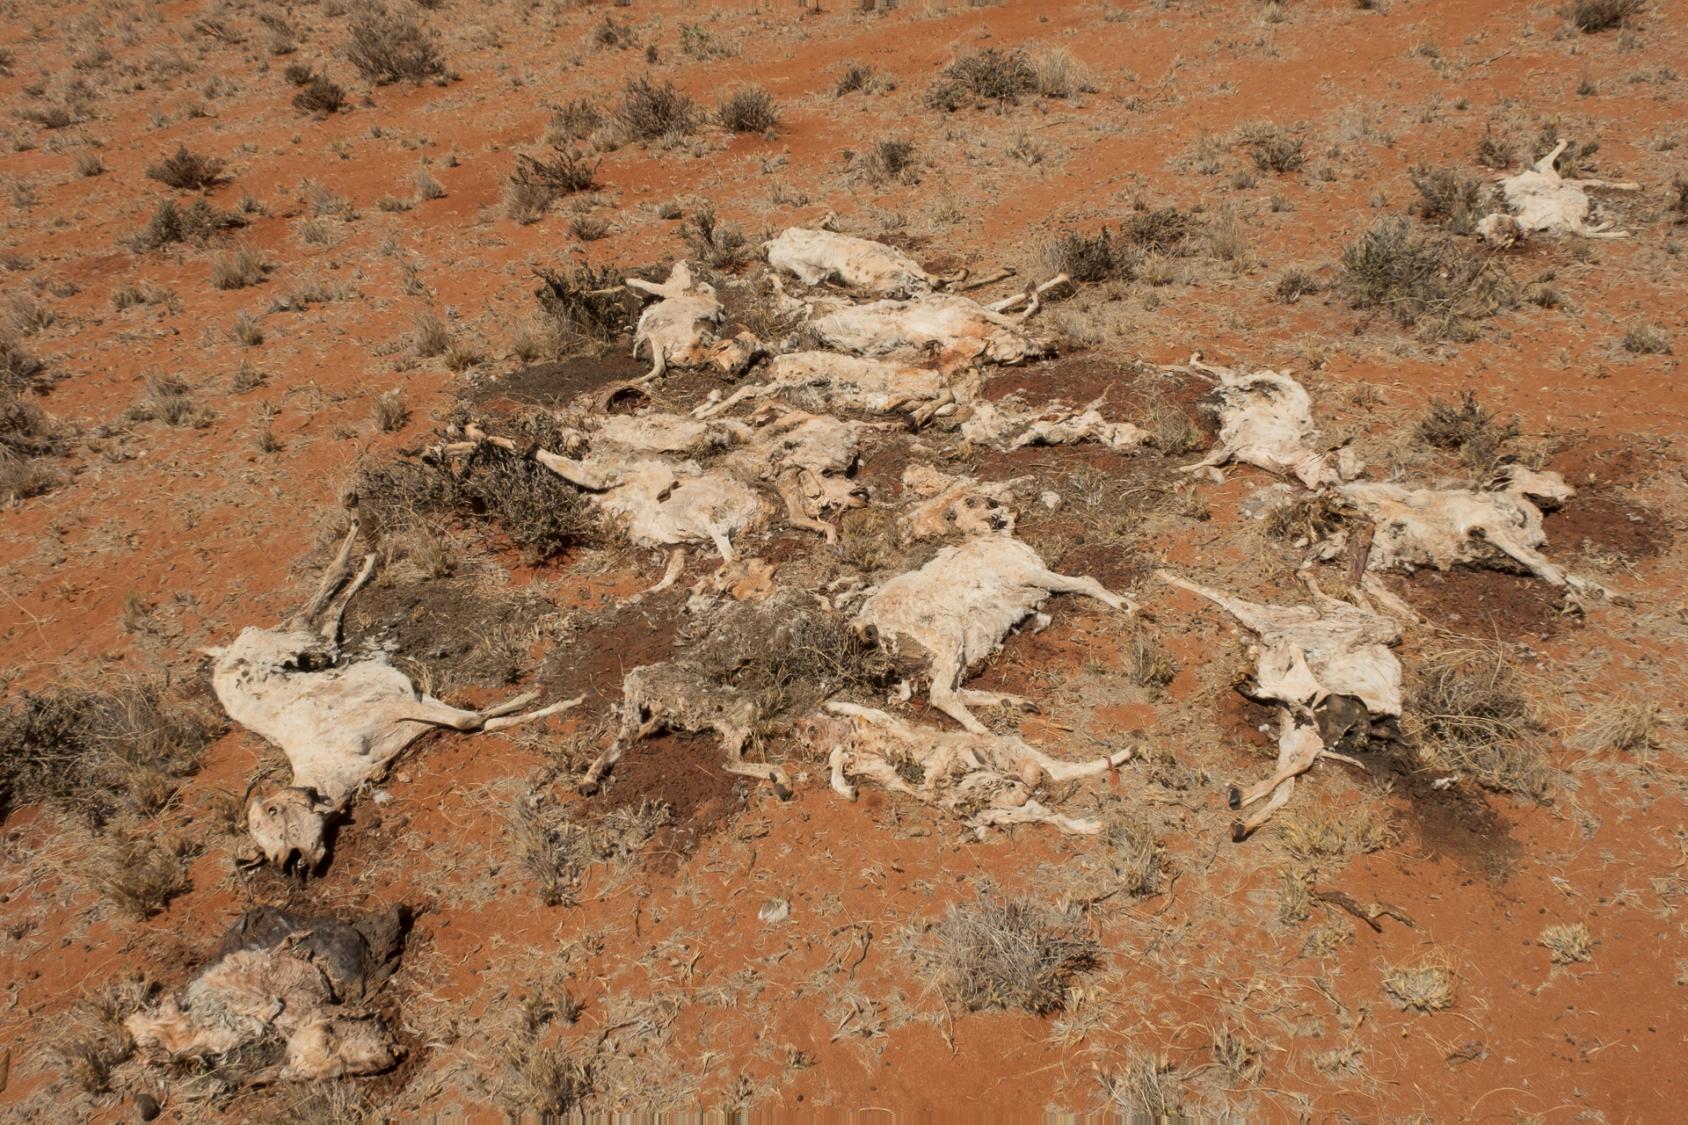 A herd of camels that died from starvation was photographed in a rural area of Galmudug, Somalia, in February 2022.